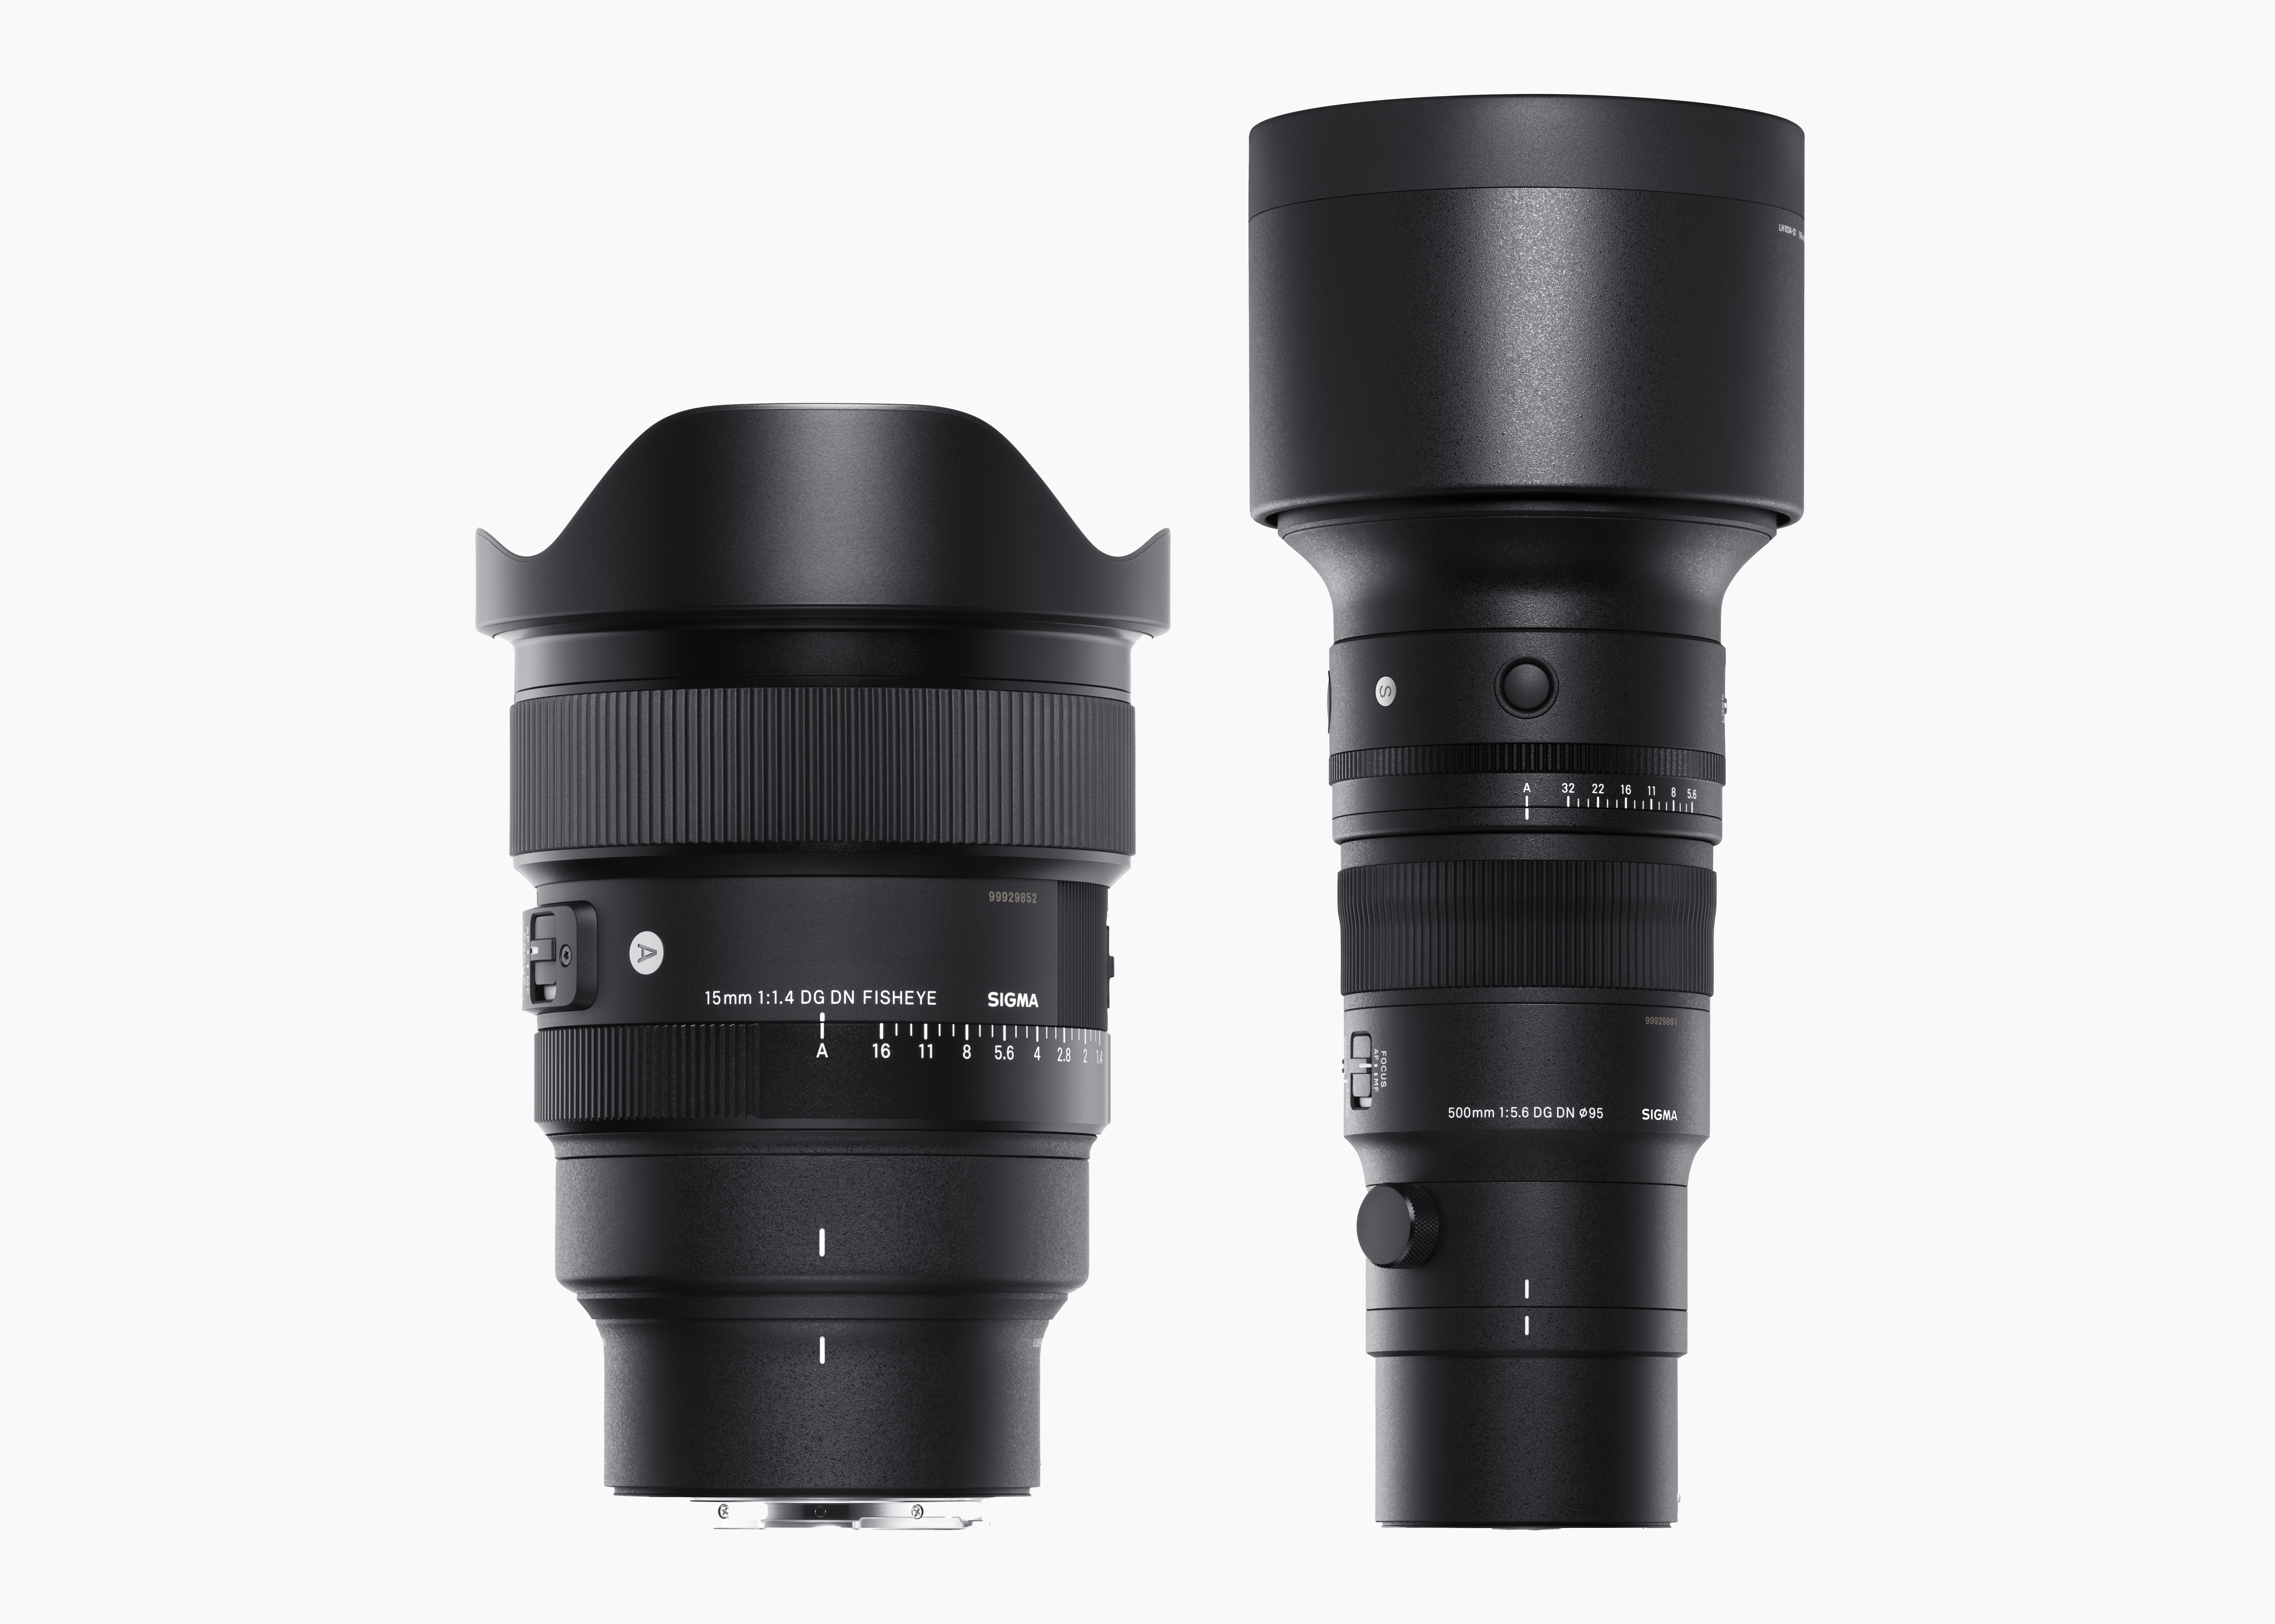 NEW SIGMA 15mm F1.4 DG DN and SIGMA 500mm F5.6 13